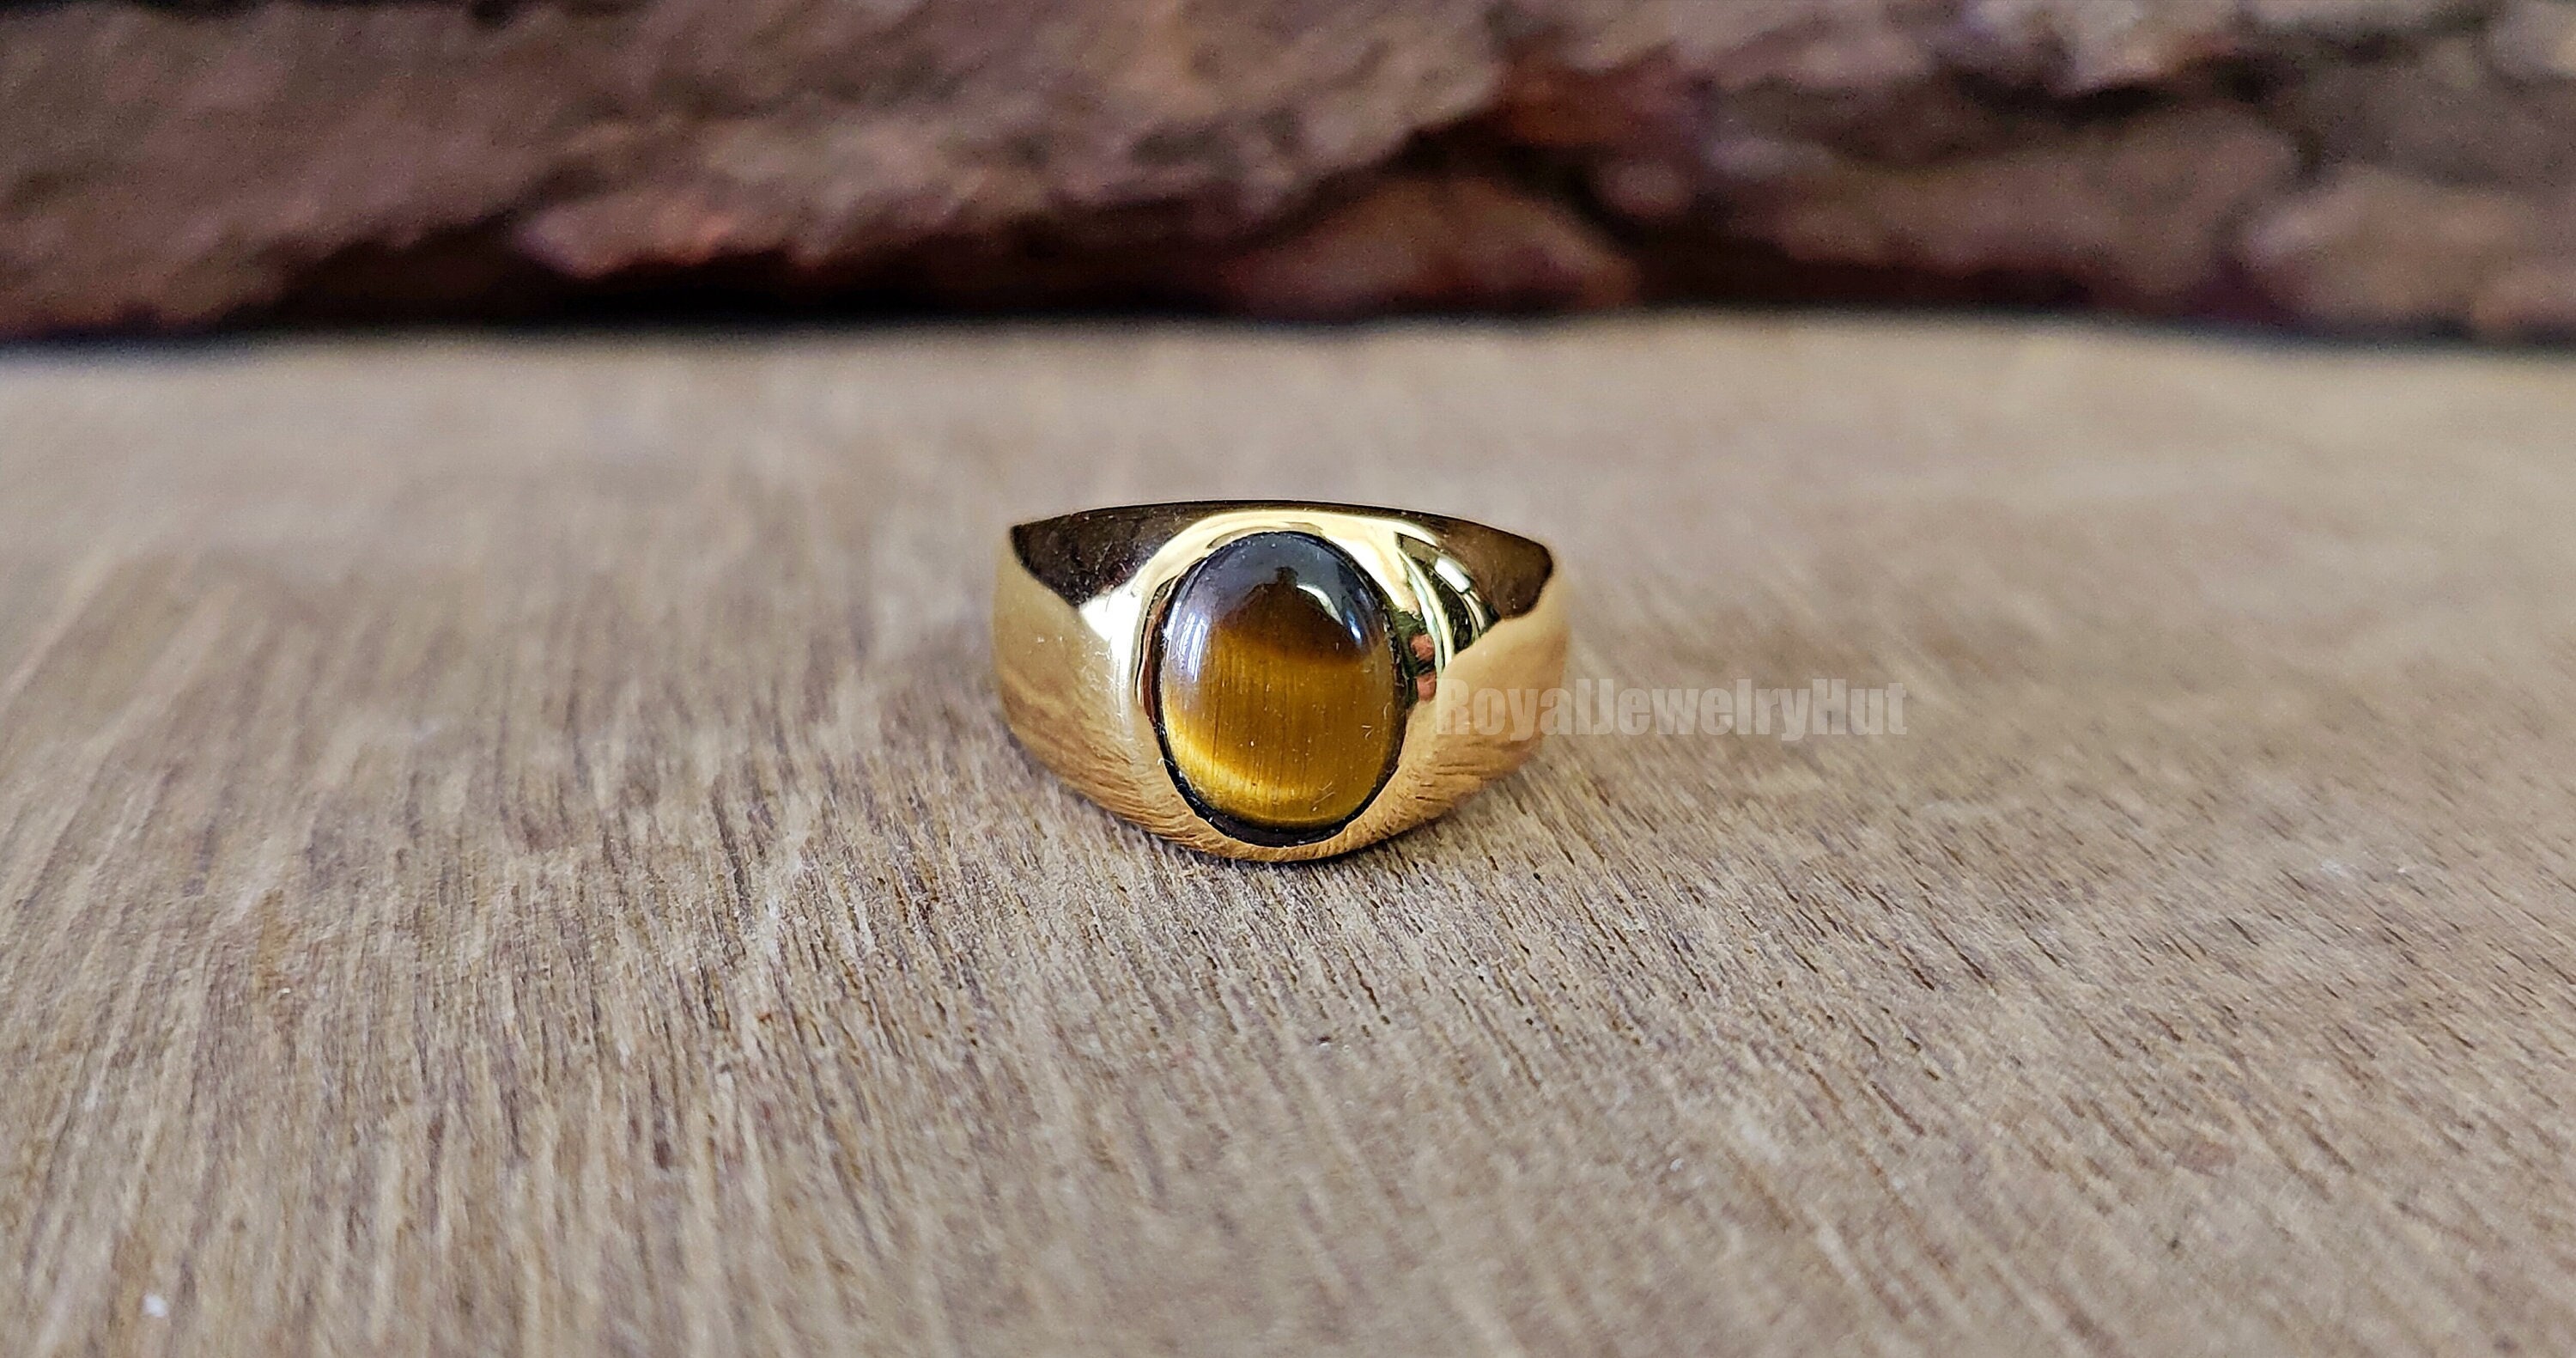 Solid 925 Sterling Silver Jewelry Heavy Ring Father’s Day Gift Ring Man’s Ring Handmade Ring Big Stone Ring Statement Ring Natural Tiger Eye Ring Stylish Ring 